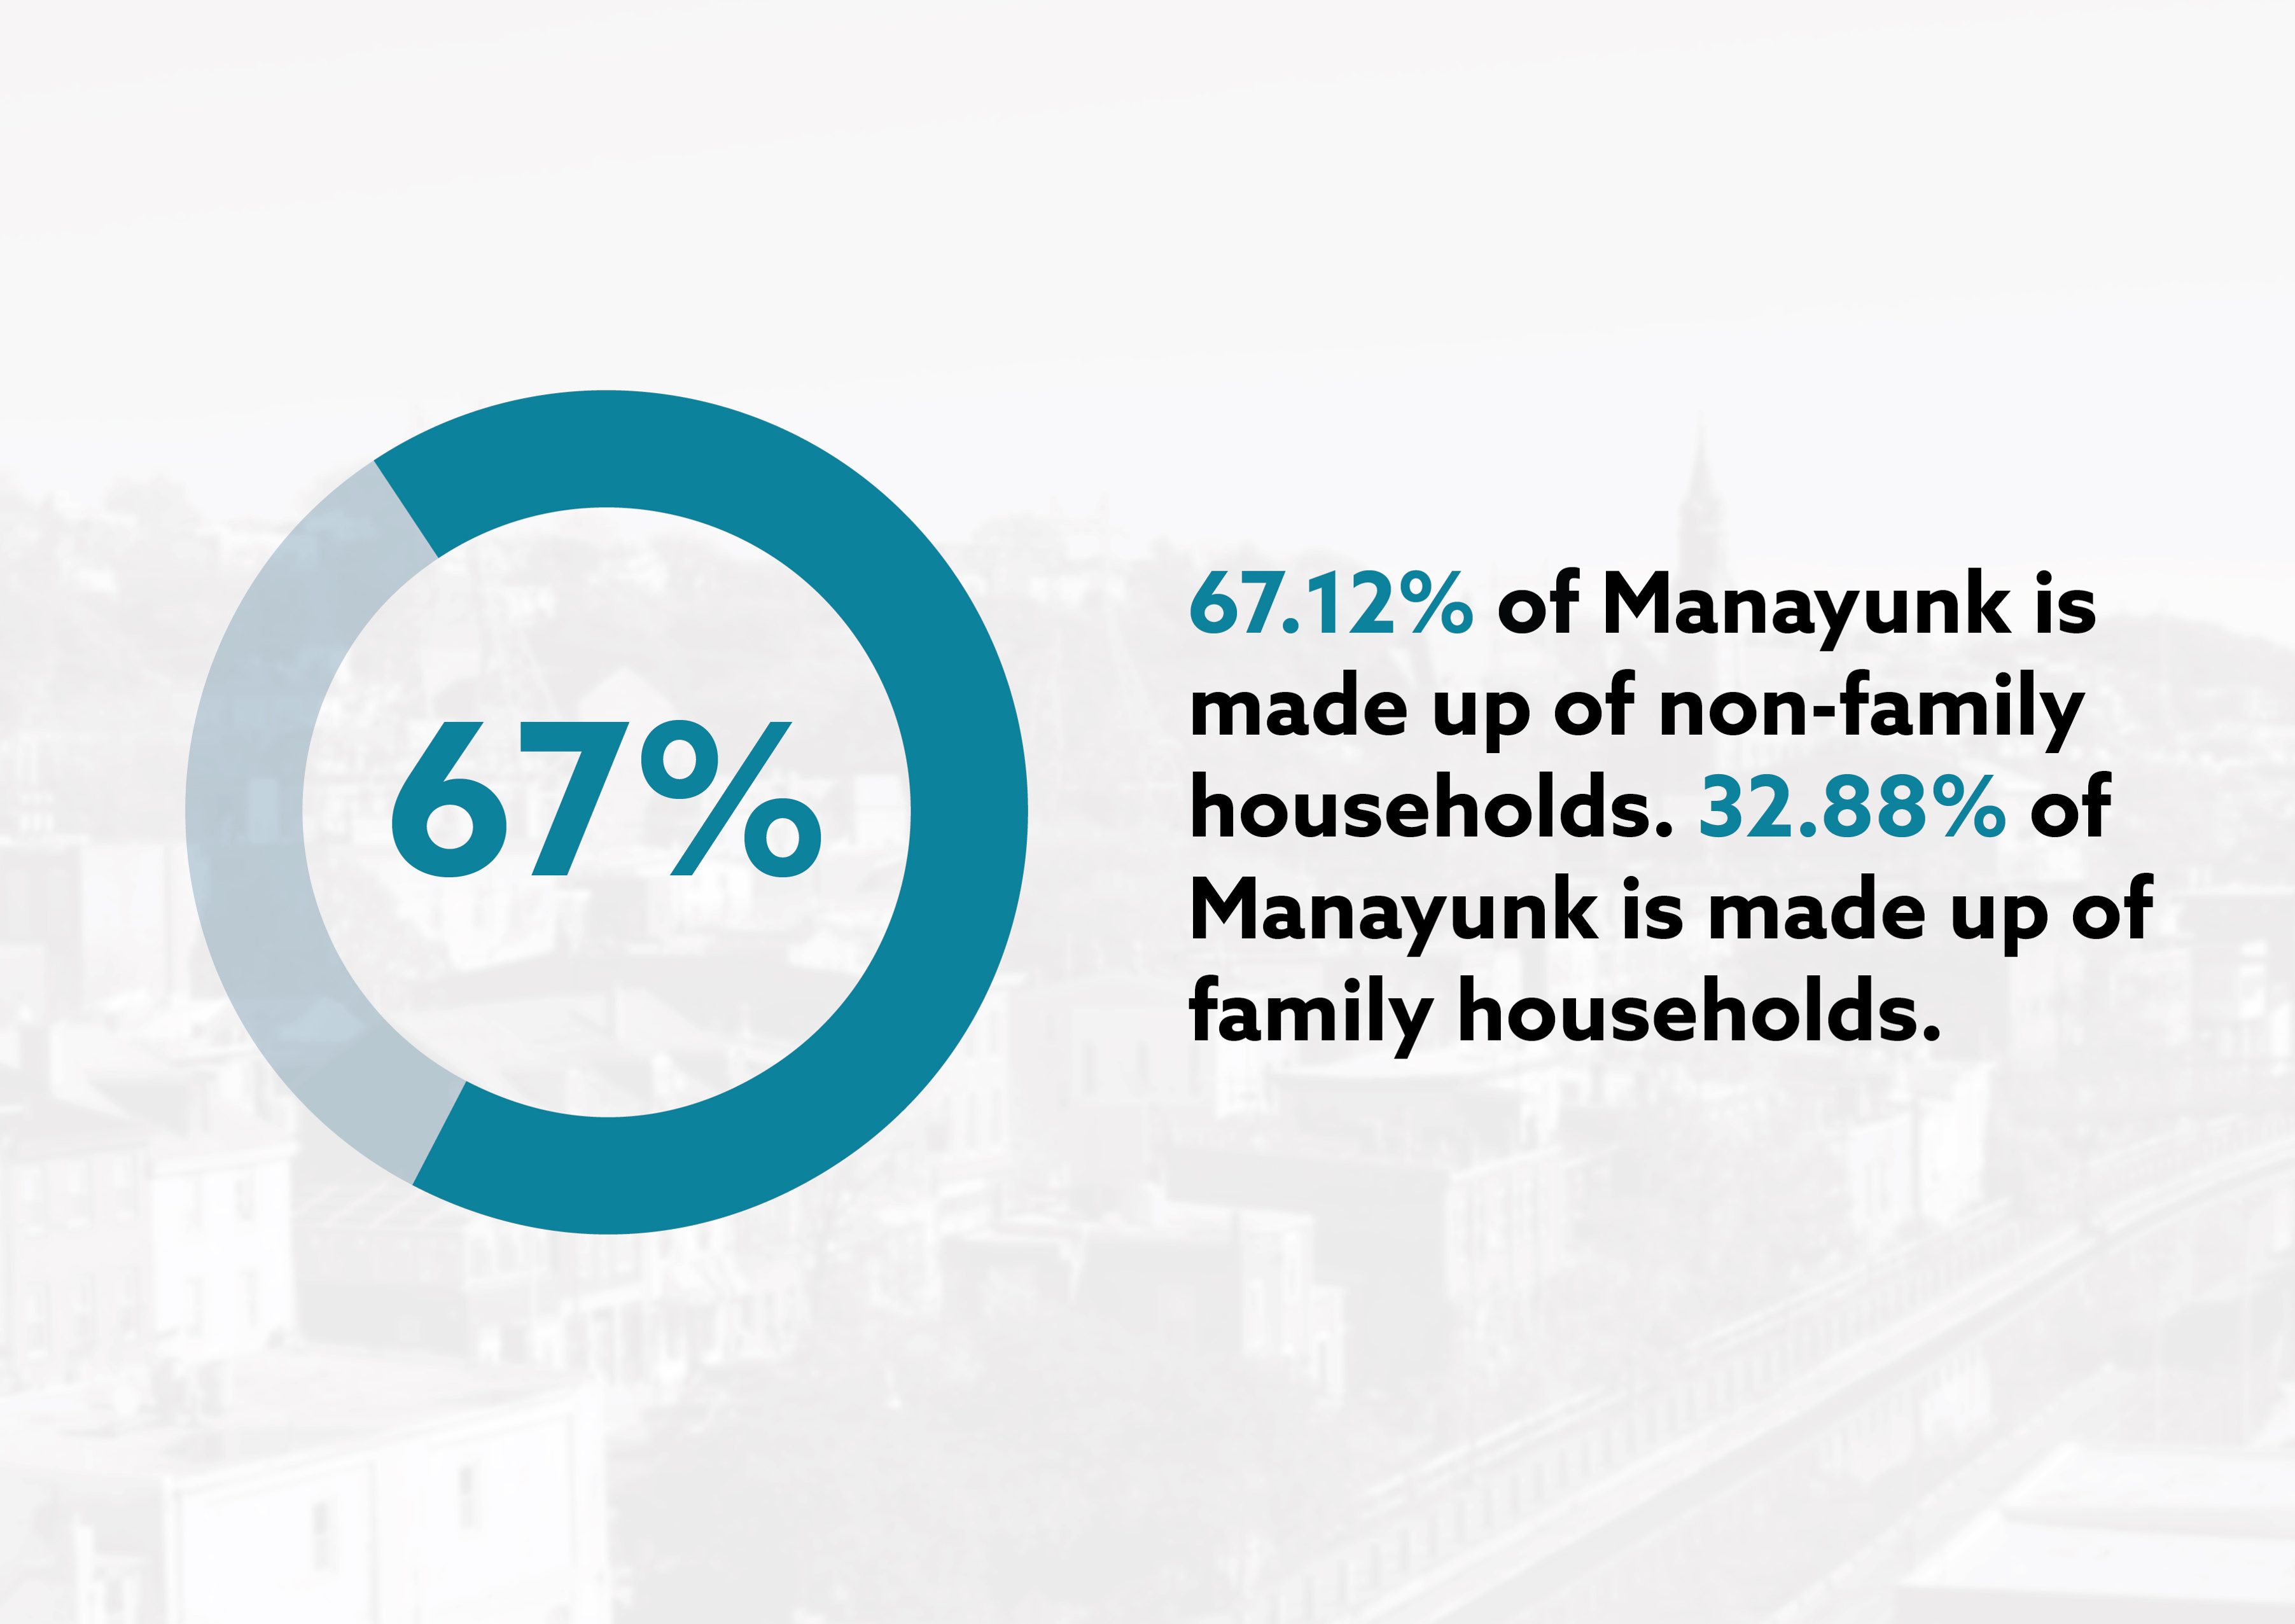 Demographic statistics are designed with Manayunk in the background.